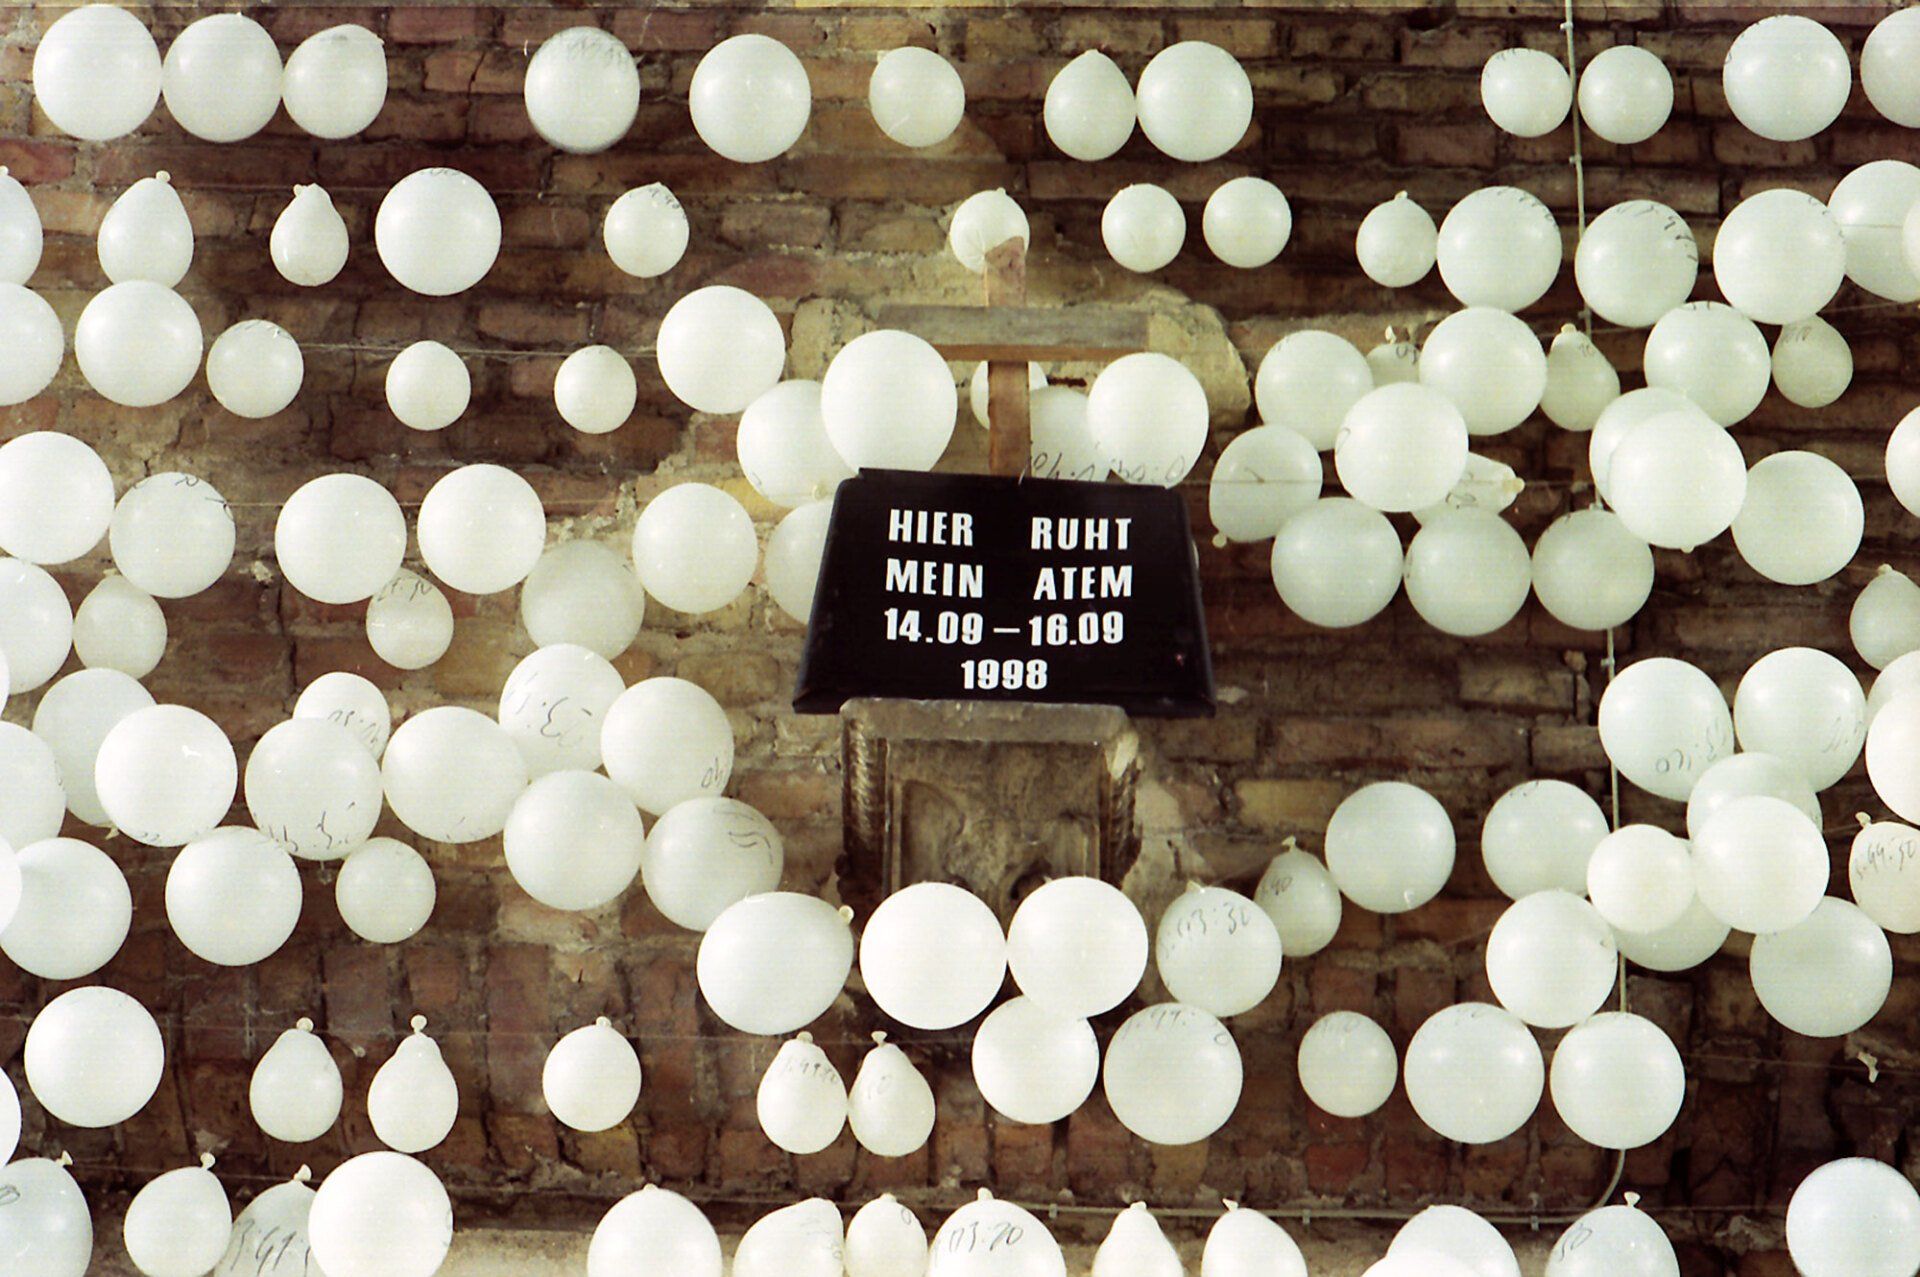 Installation. 5000 white balloons. On each of the balloons, Sebastian Bieniek wrote down the sec., Min., Hour and date when it was inflated. Exhibited at the Museum der Charitè, Berlin (1998)